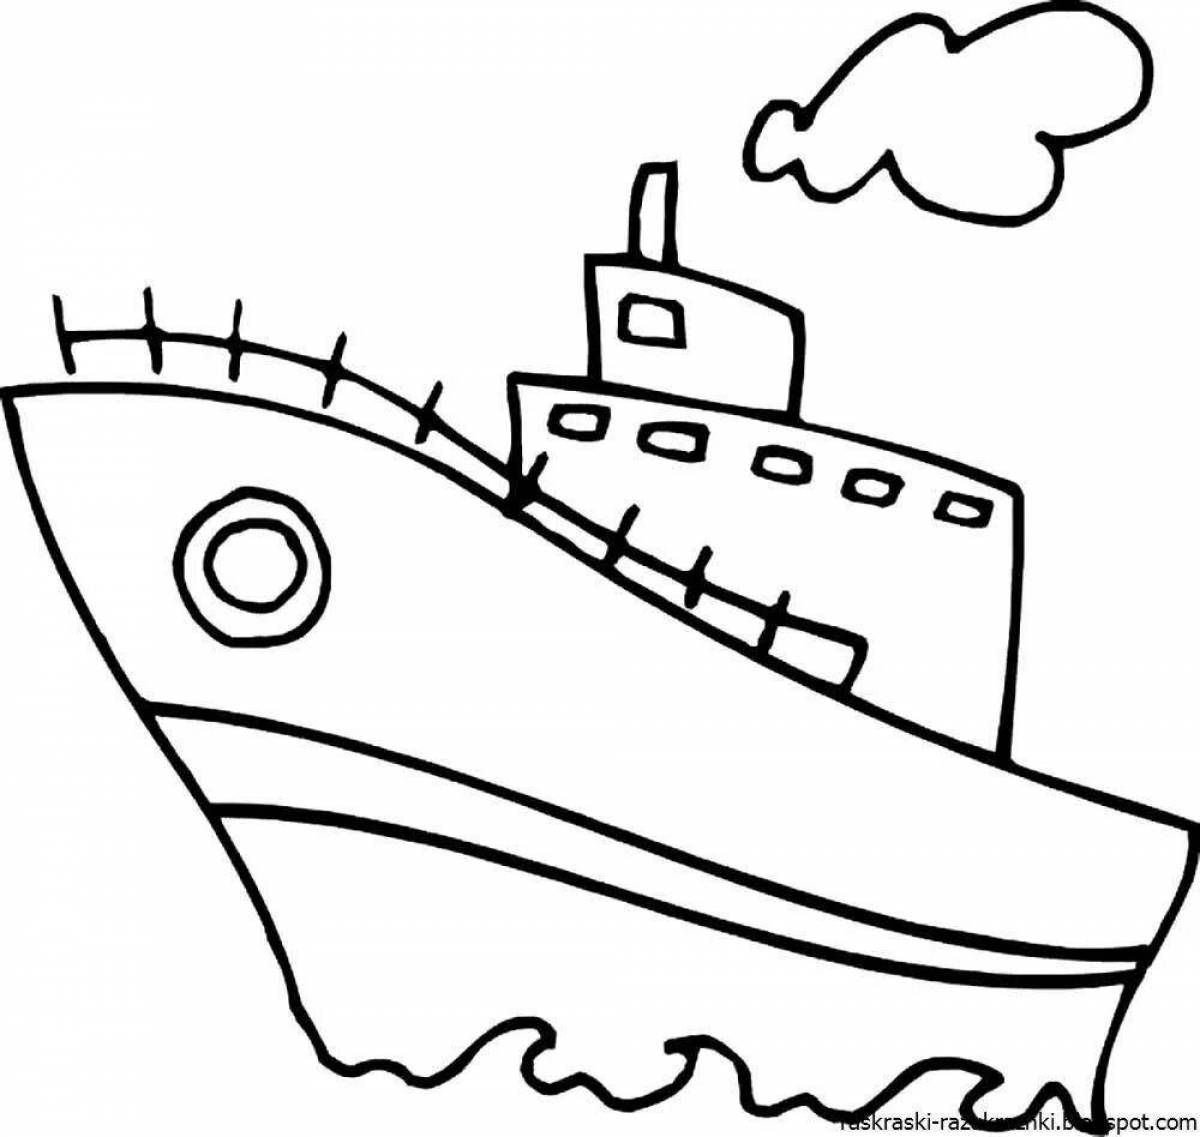 Breathtaking ship coloring book for 5-6 year olds